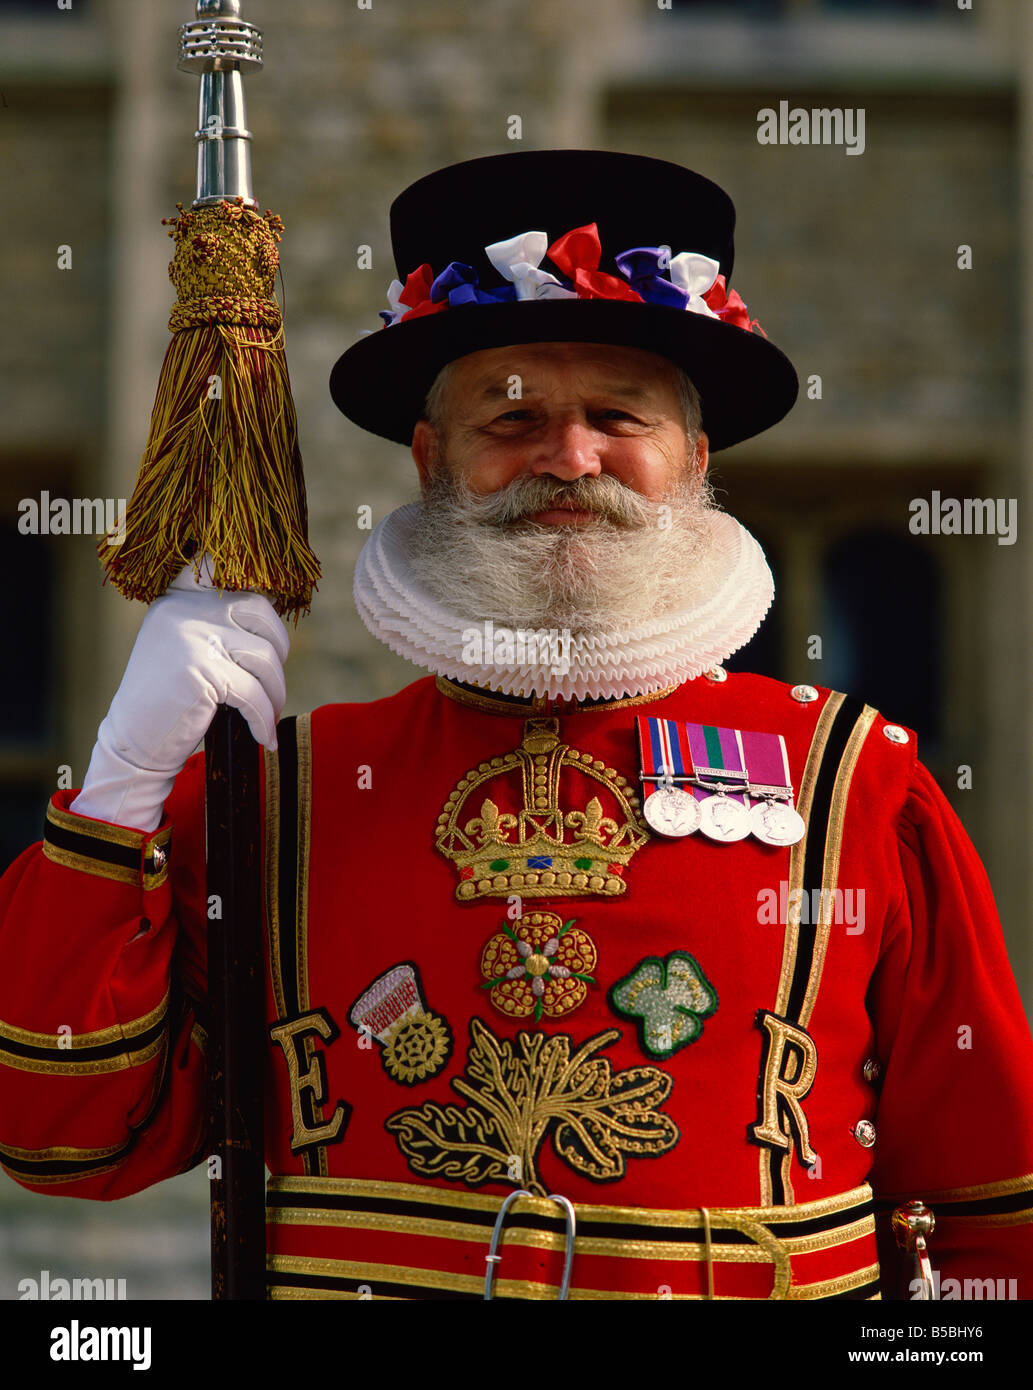 Beefeater am Tower of London, London, England, Europa Stockfoto